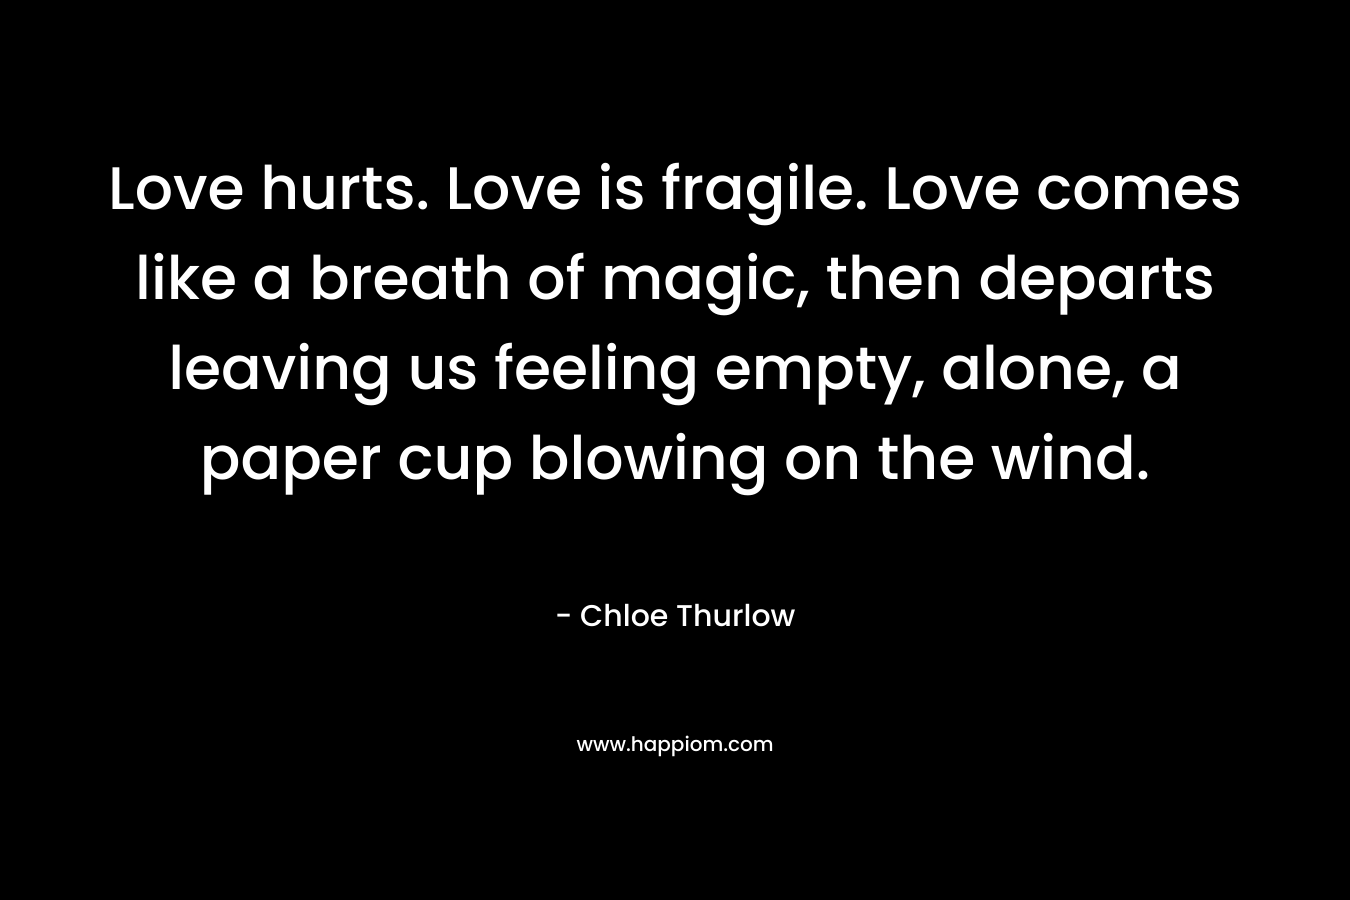 Love hurts. Love is fragile. Love comes like a breath of magic, then departs leaving us feeling empty, alone, a paper cup blowing on the wind.